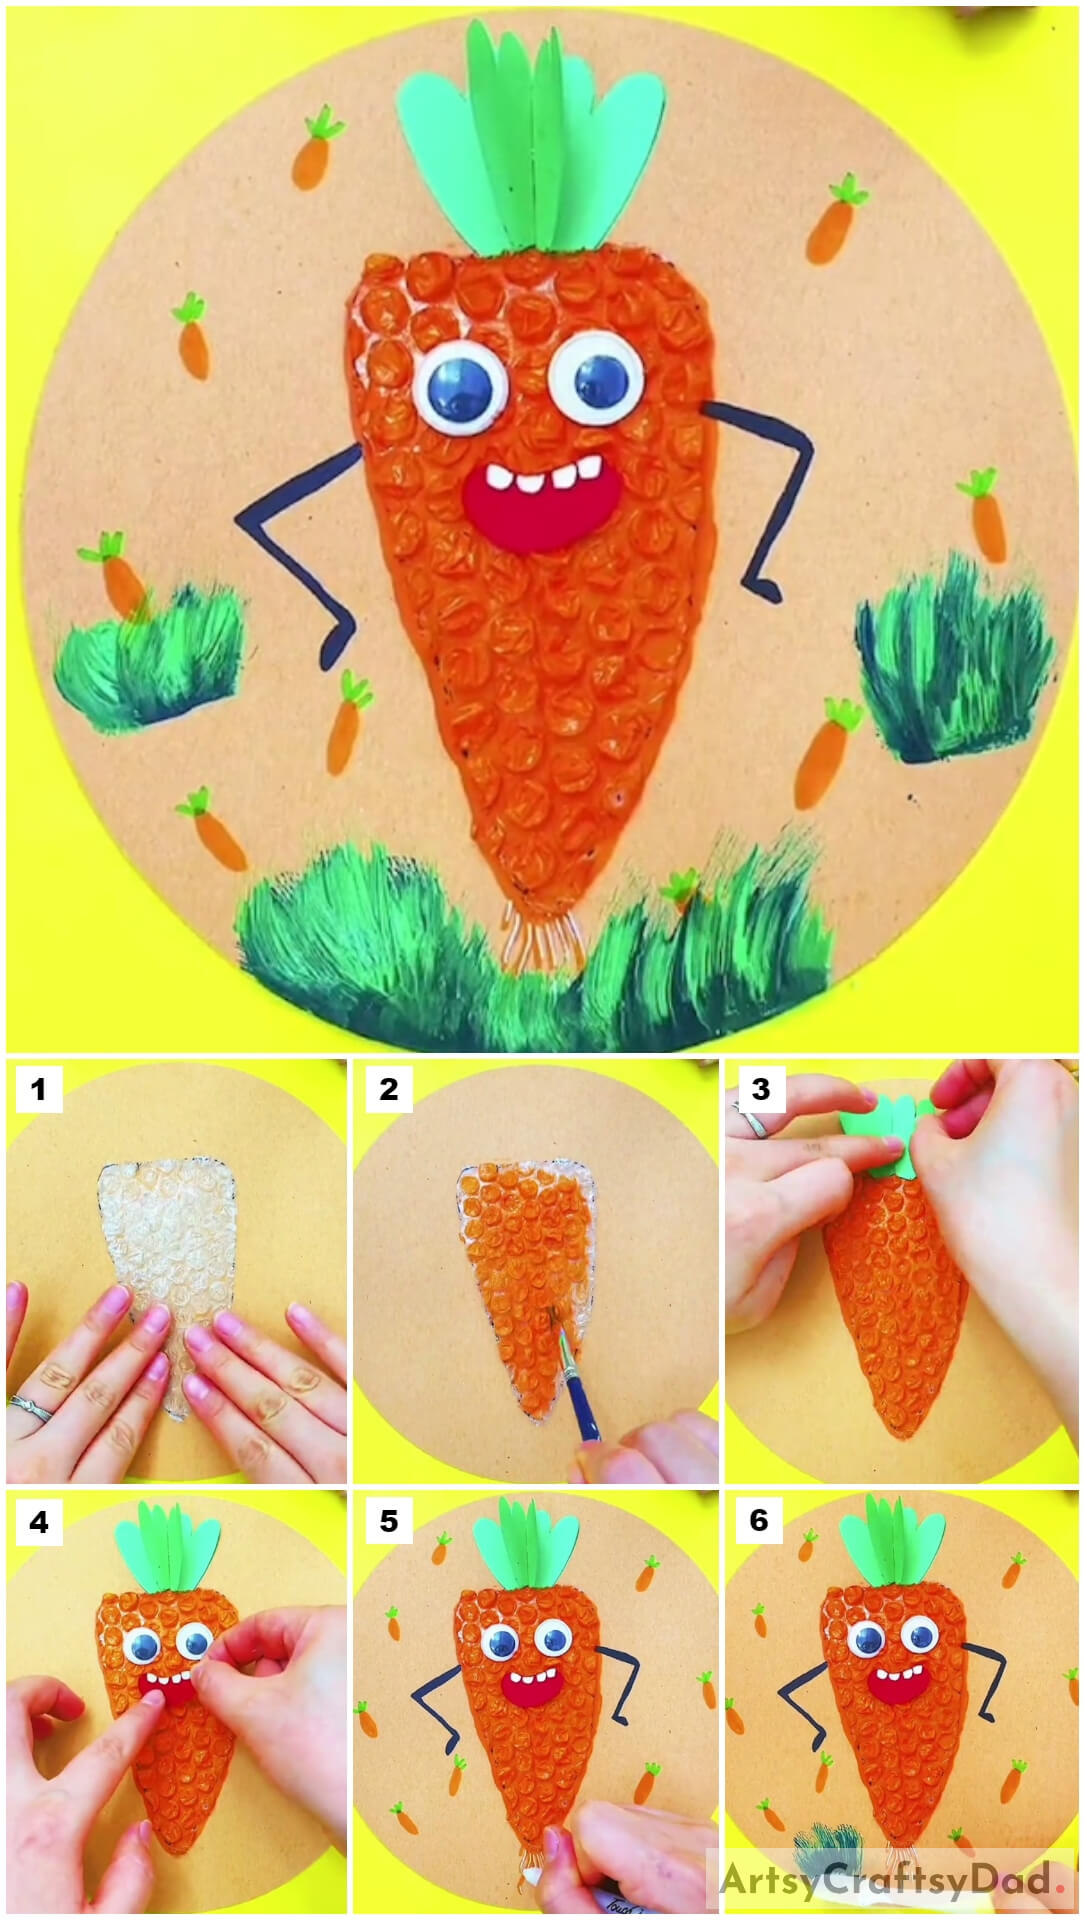 Bubble Wrap Carrot Artwork Craft Tutorial For Kids